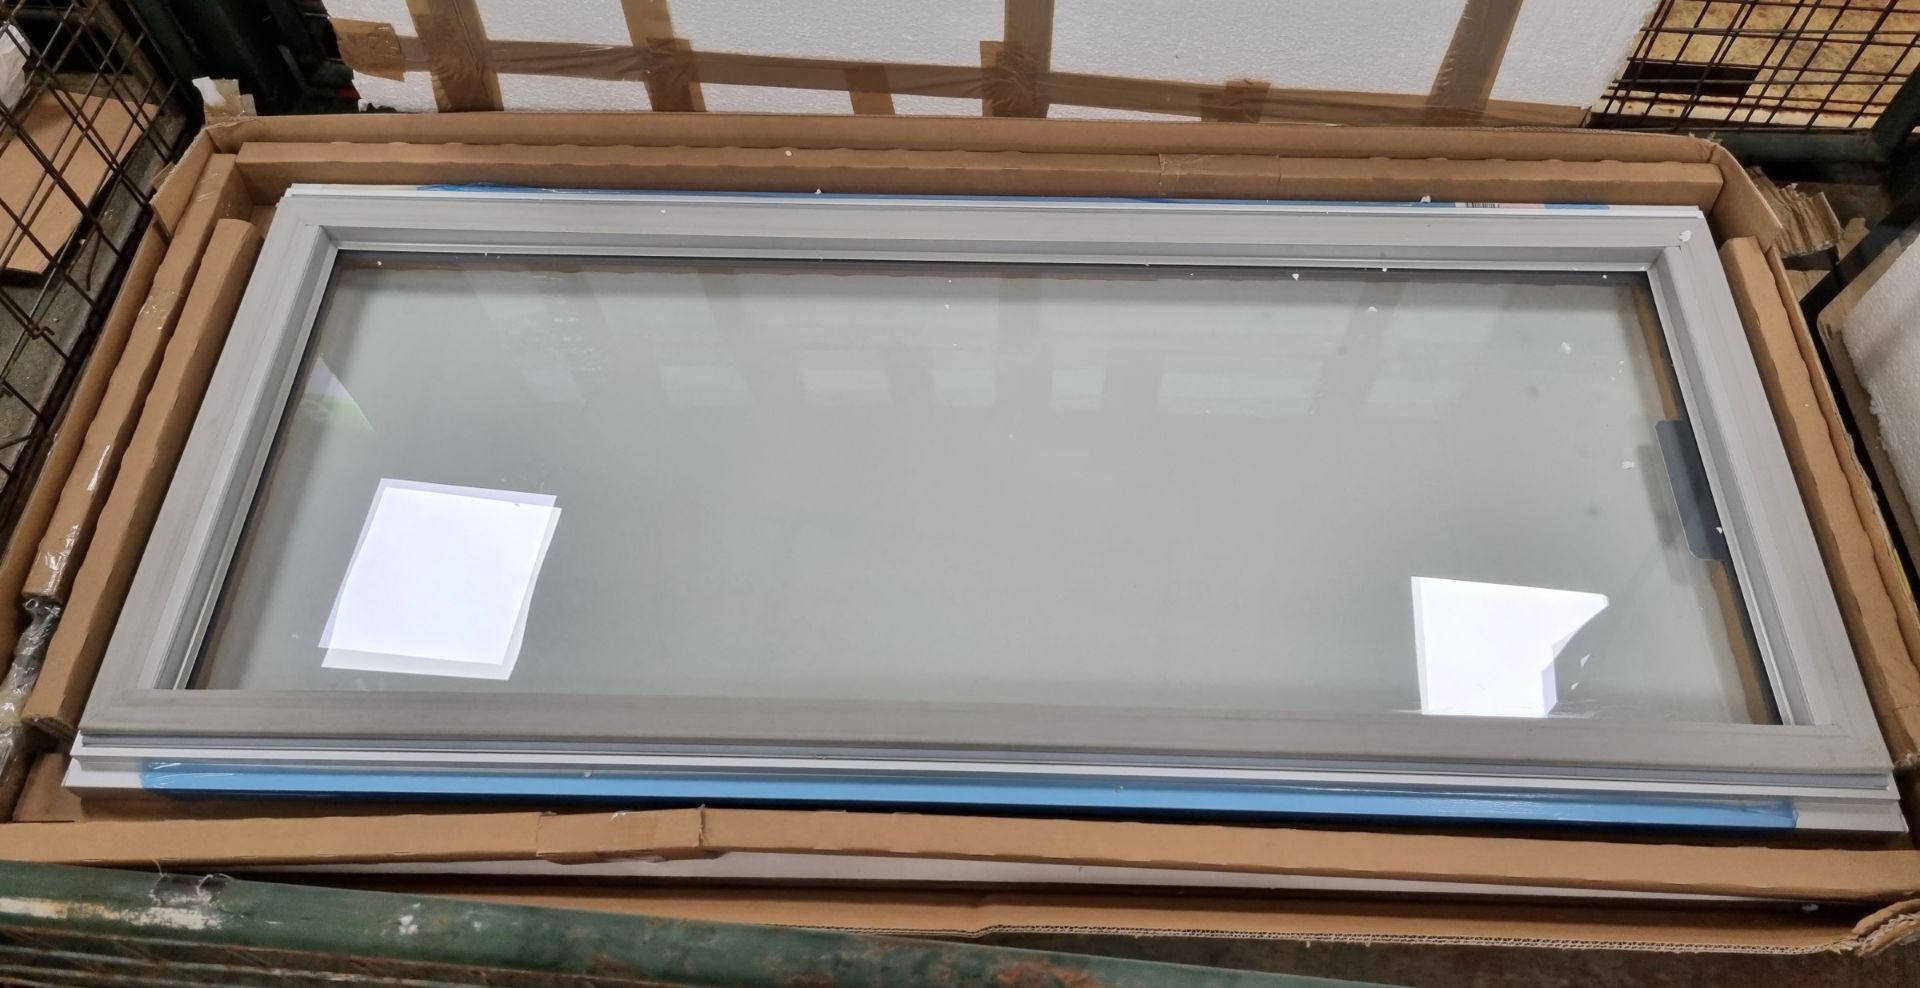 Catering spares - 6x display glass doors mix, Electrolux glass door and Fagor inner glass kit - Image 6 of 13